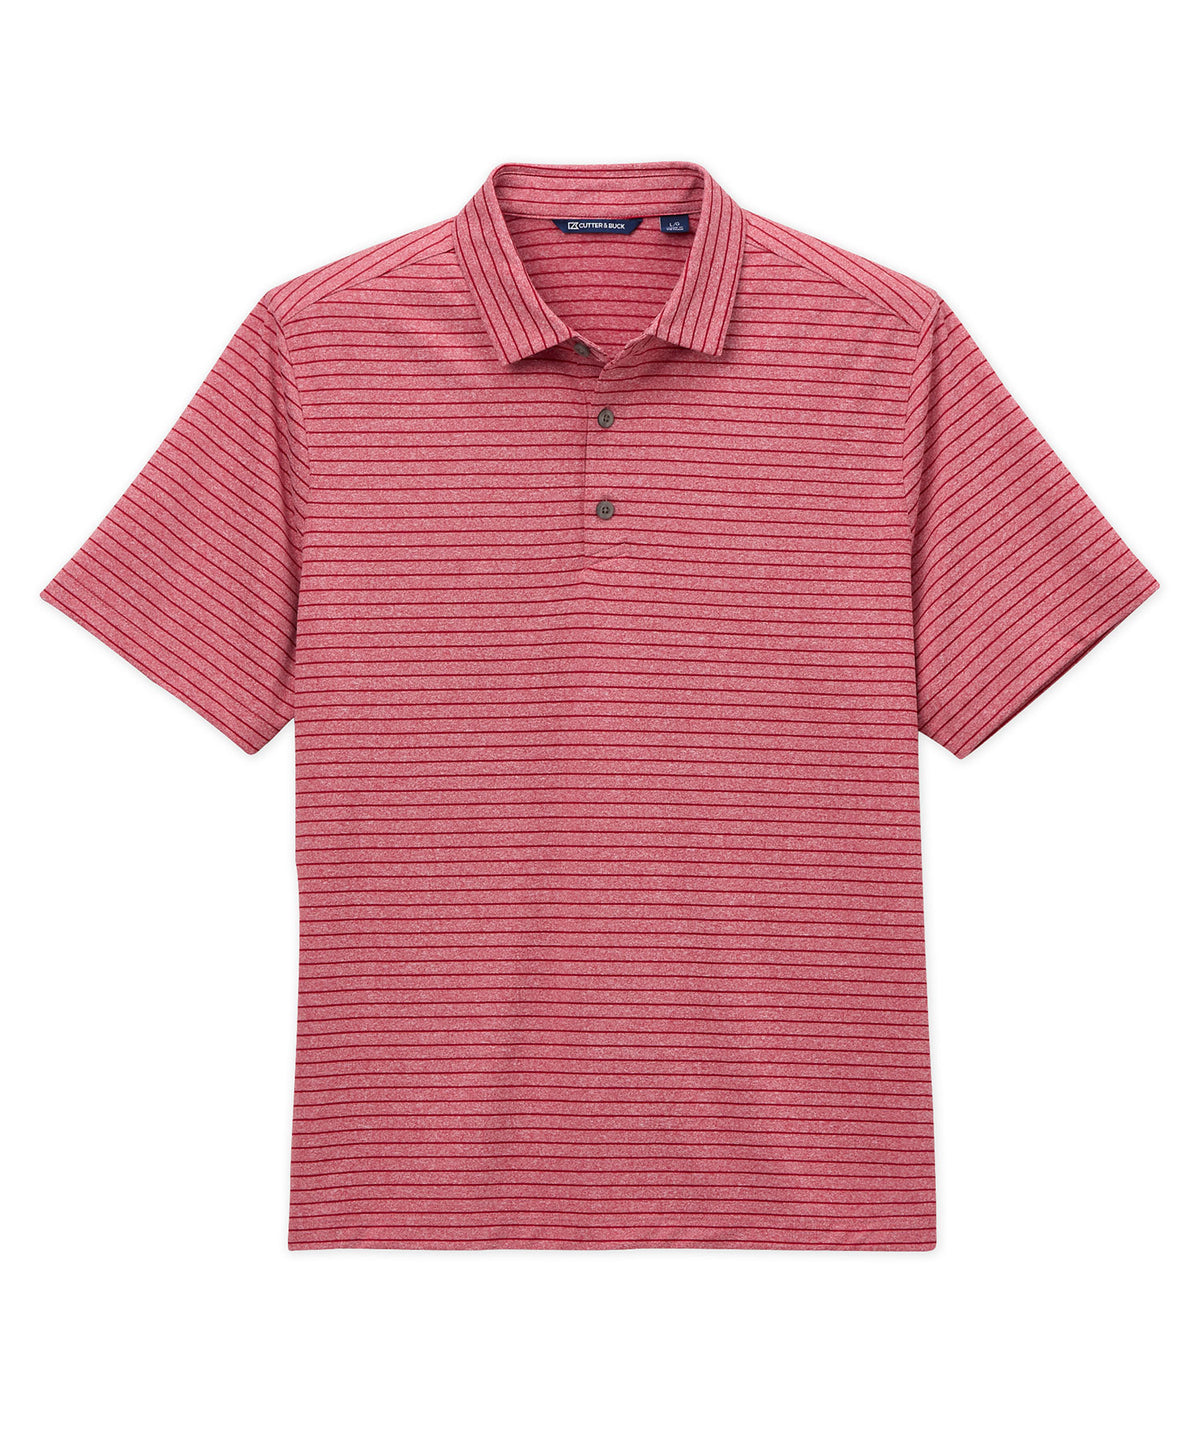 Cutter & Buck Forge Eco Heather Stripe Pattern Stretch Recycled Polo, Big & Tall